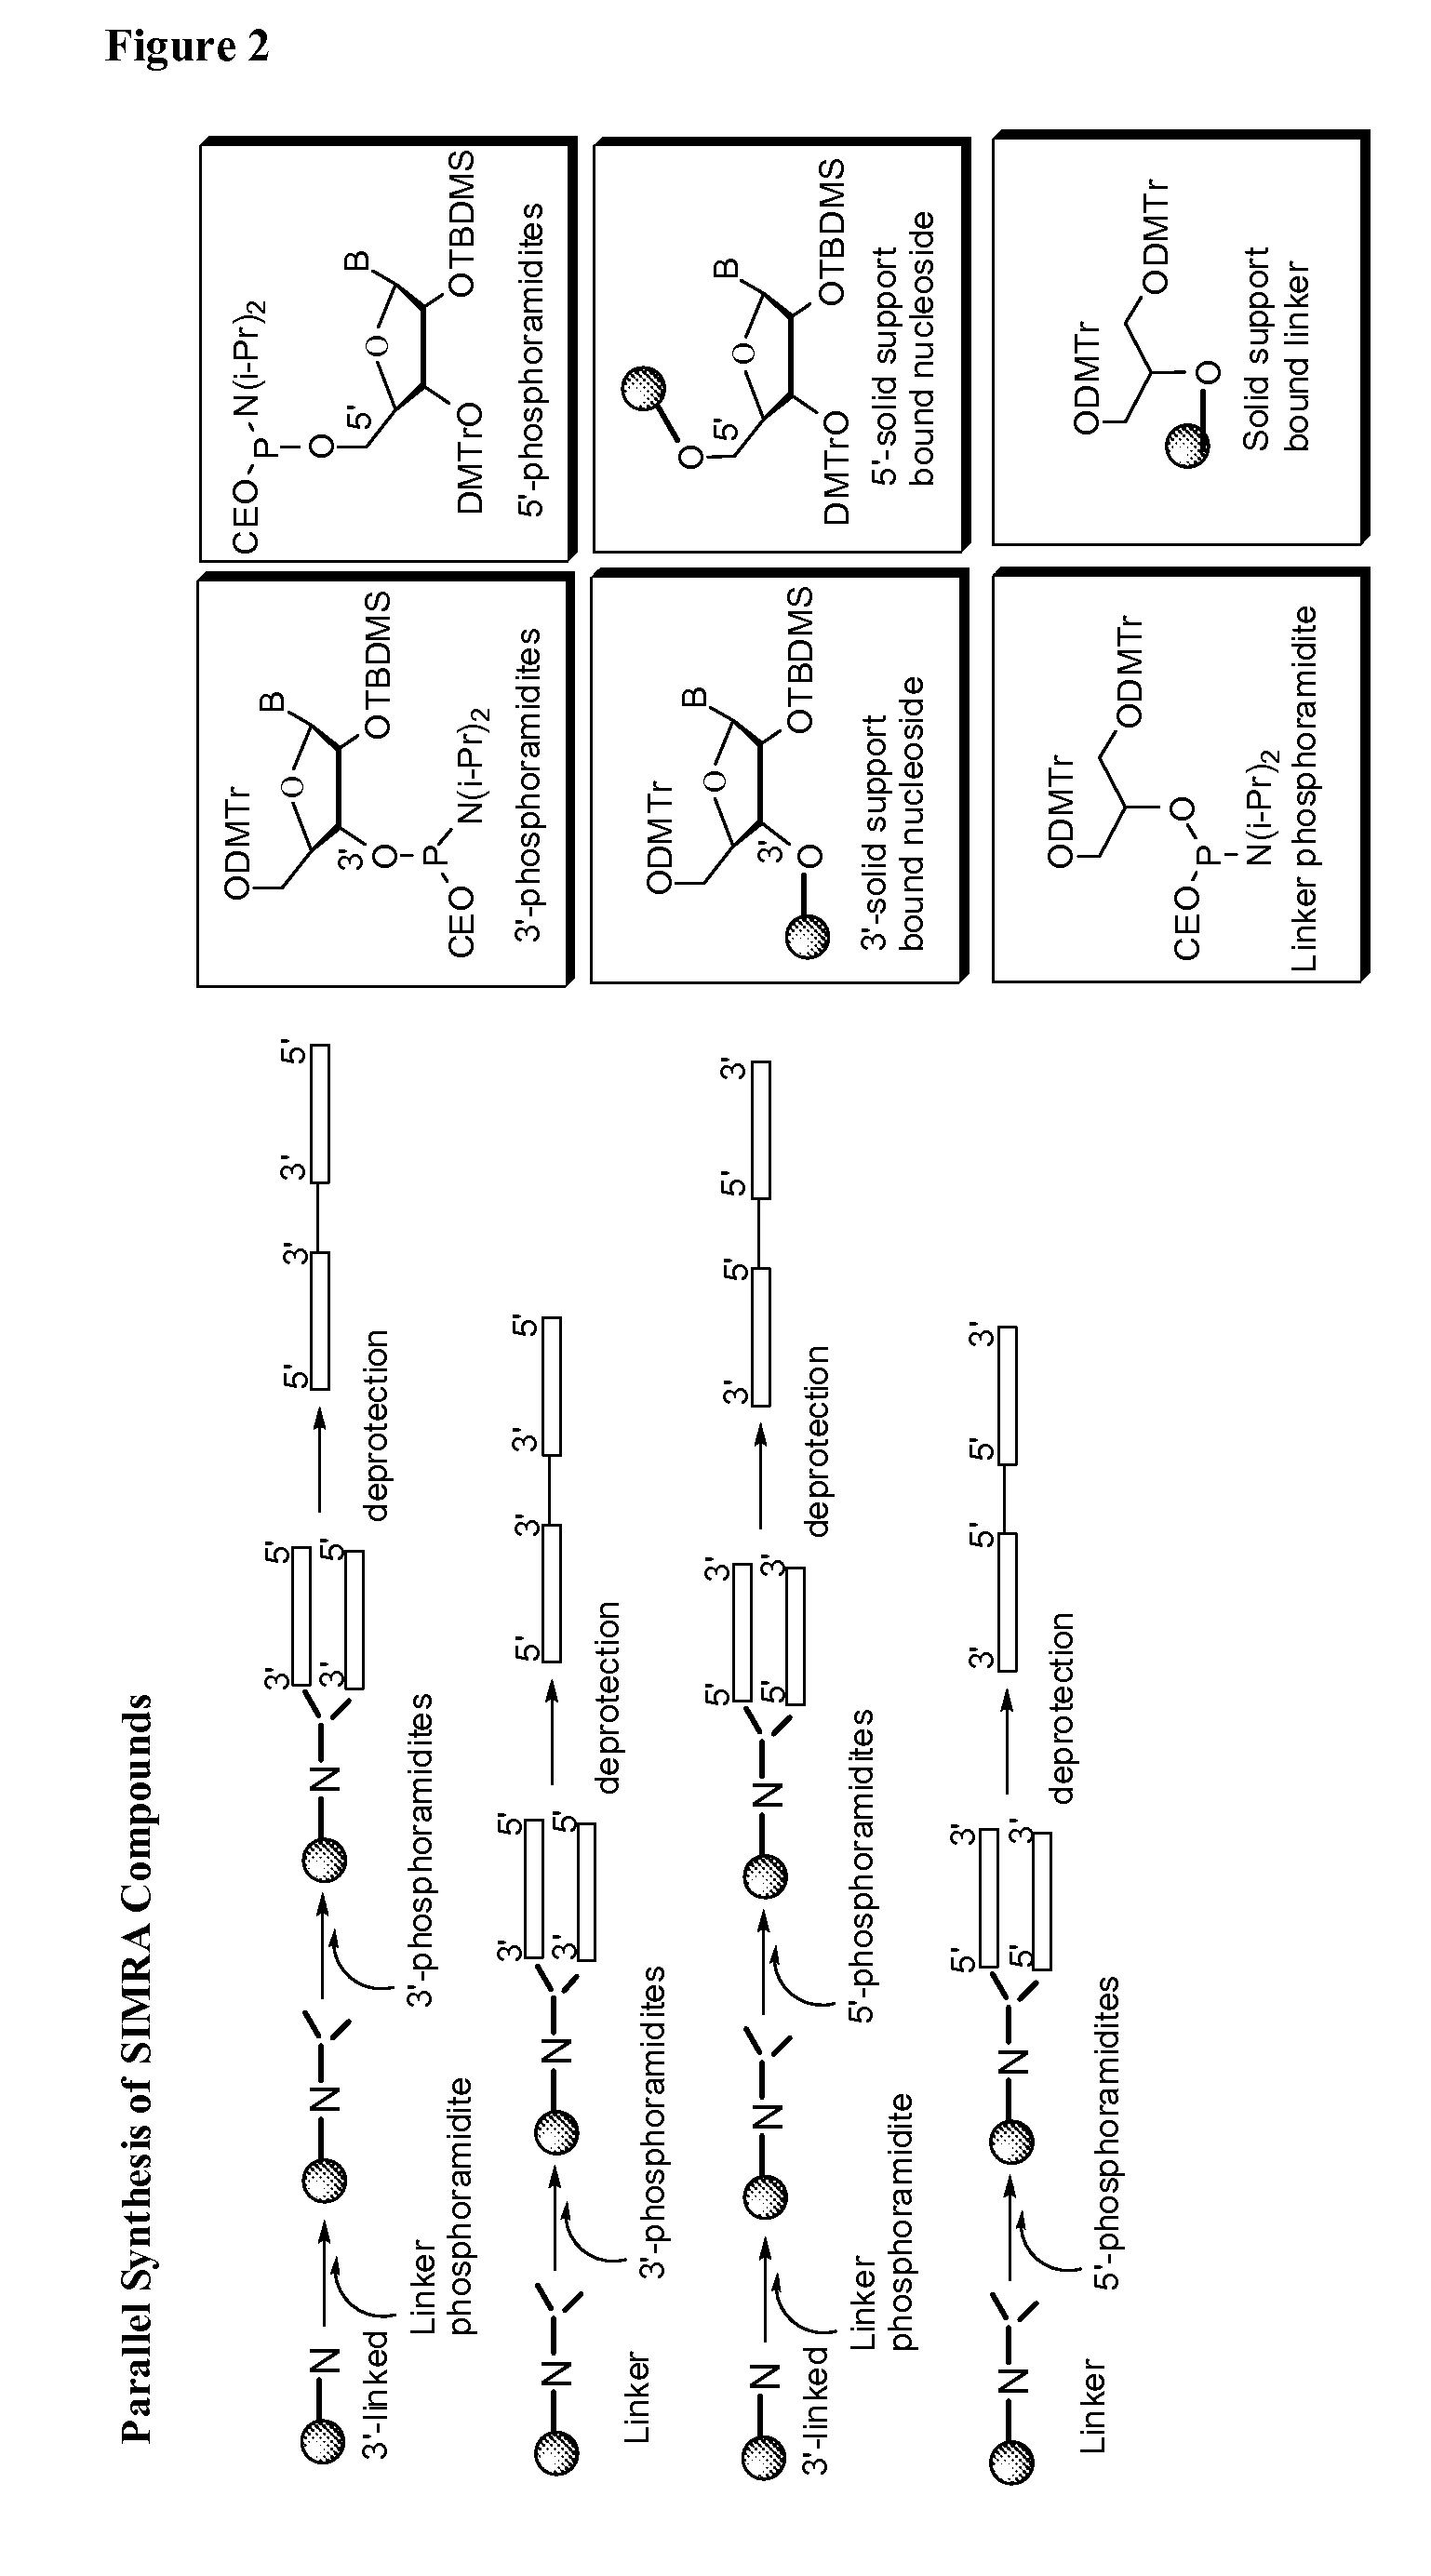 Stabilized immune modulatory RNA (SIMRA) compounds for tlr7 and tlr8